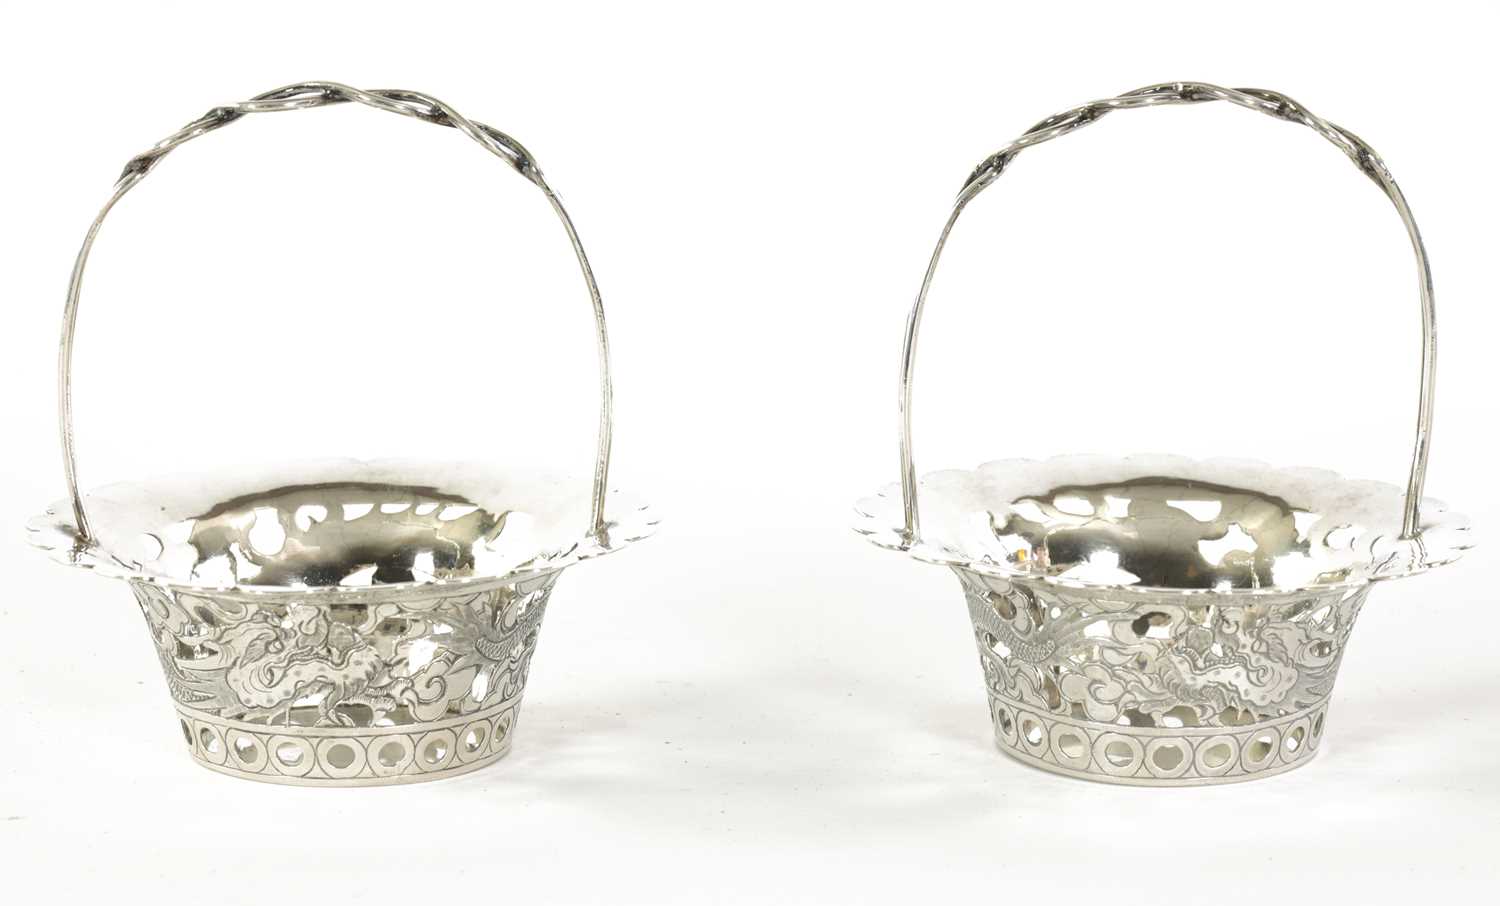 Lot 120 - A PAIR OF CHINESE SILVER SWEETMEAT BASKETS